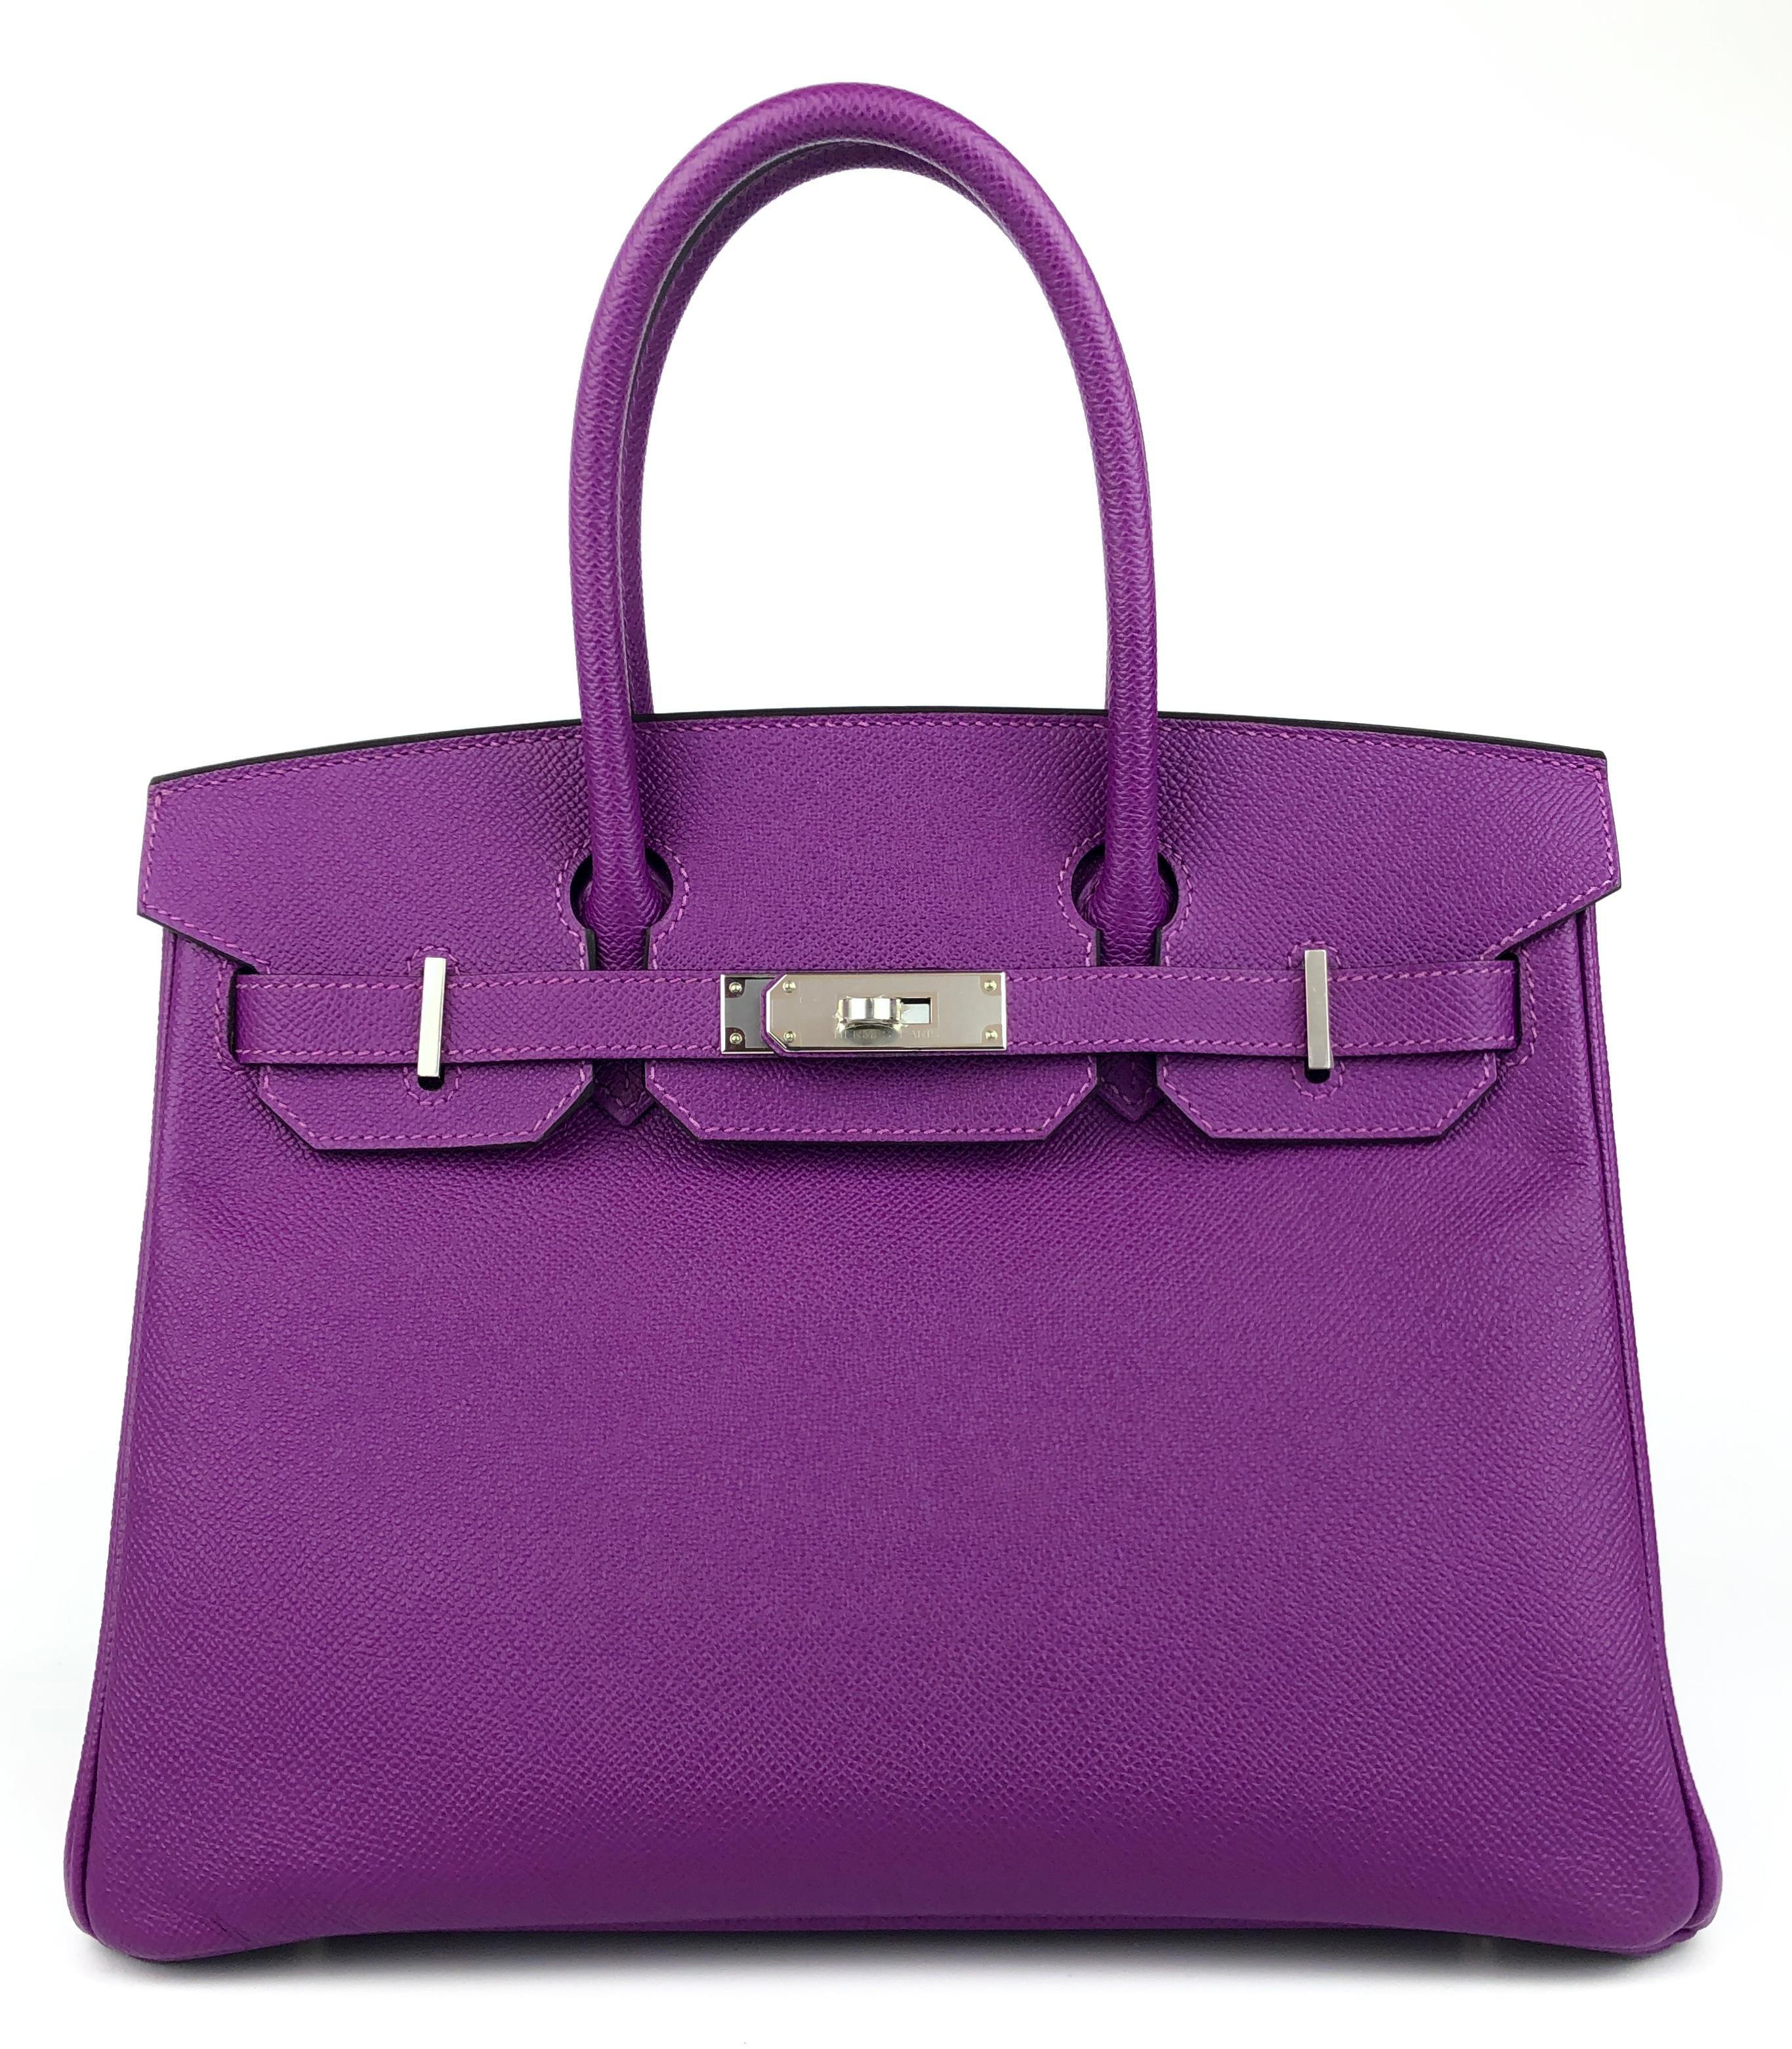 Rare Like NEW 2020 Hermes Birkin 30 Anemone Purple Epsom Leather Palladium Hardware . Y Stamp 2020. Like New.

Please Note, the bag has minor indentations on the bottom inside of the bag due to the lock accidentally being loose inside the bag during